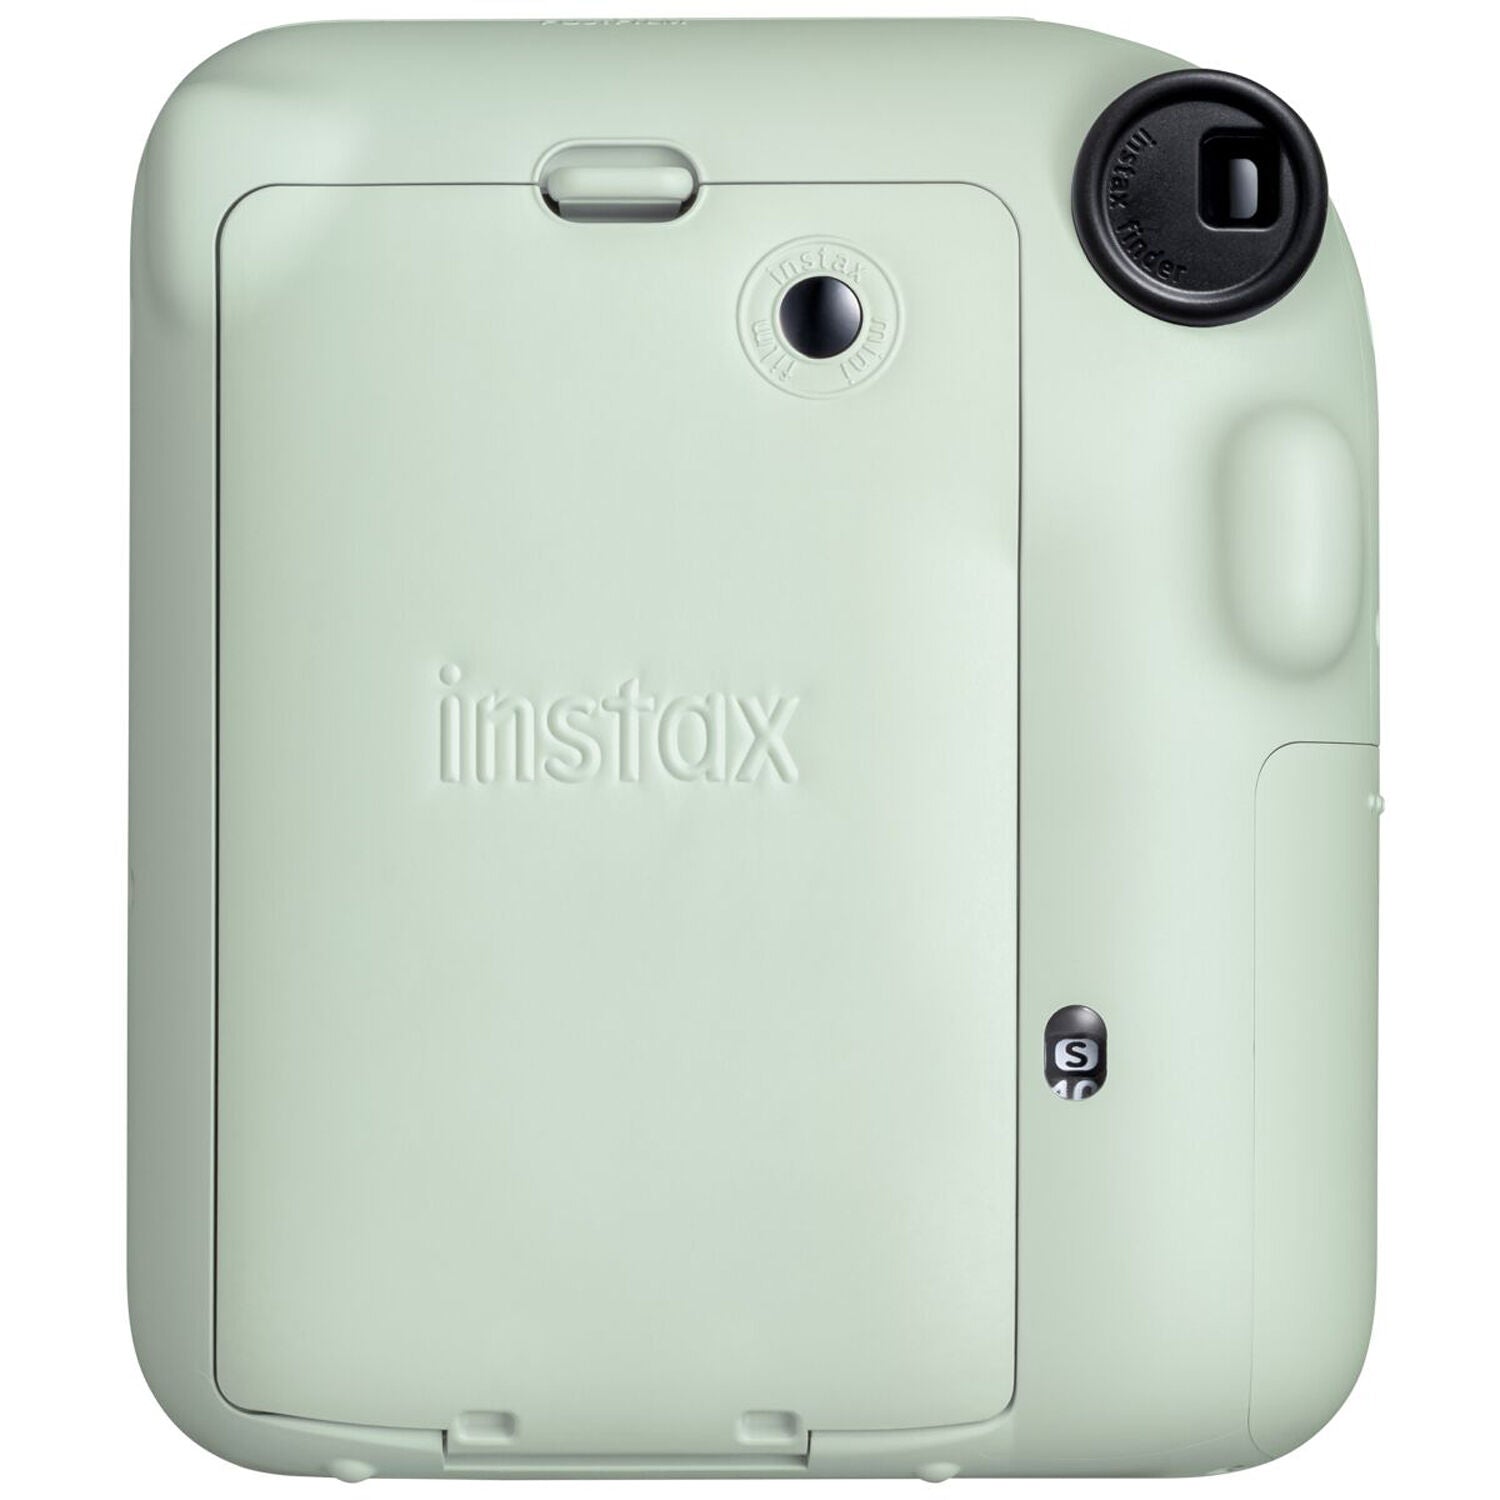 Fujifilm INSTAX Mini 12 Instant Camera with 10 Shot and Panda pouch (Mint Green)